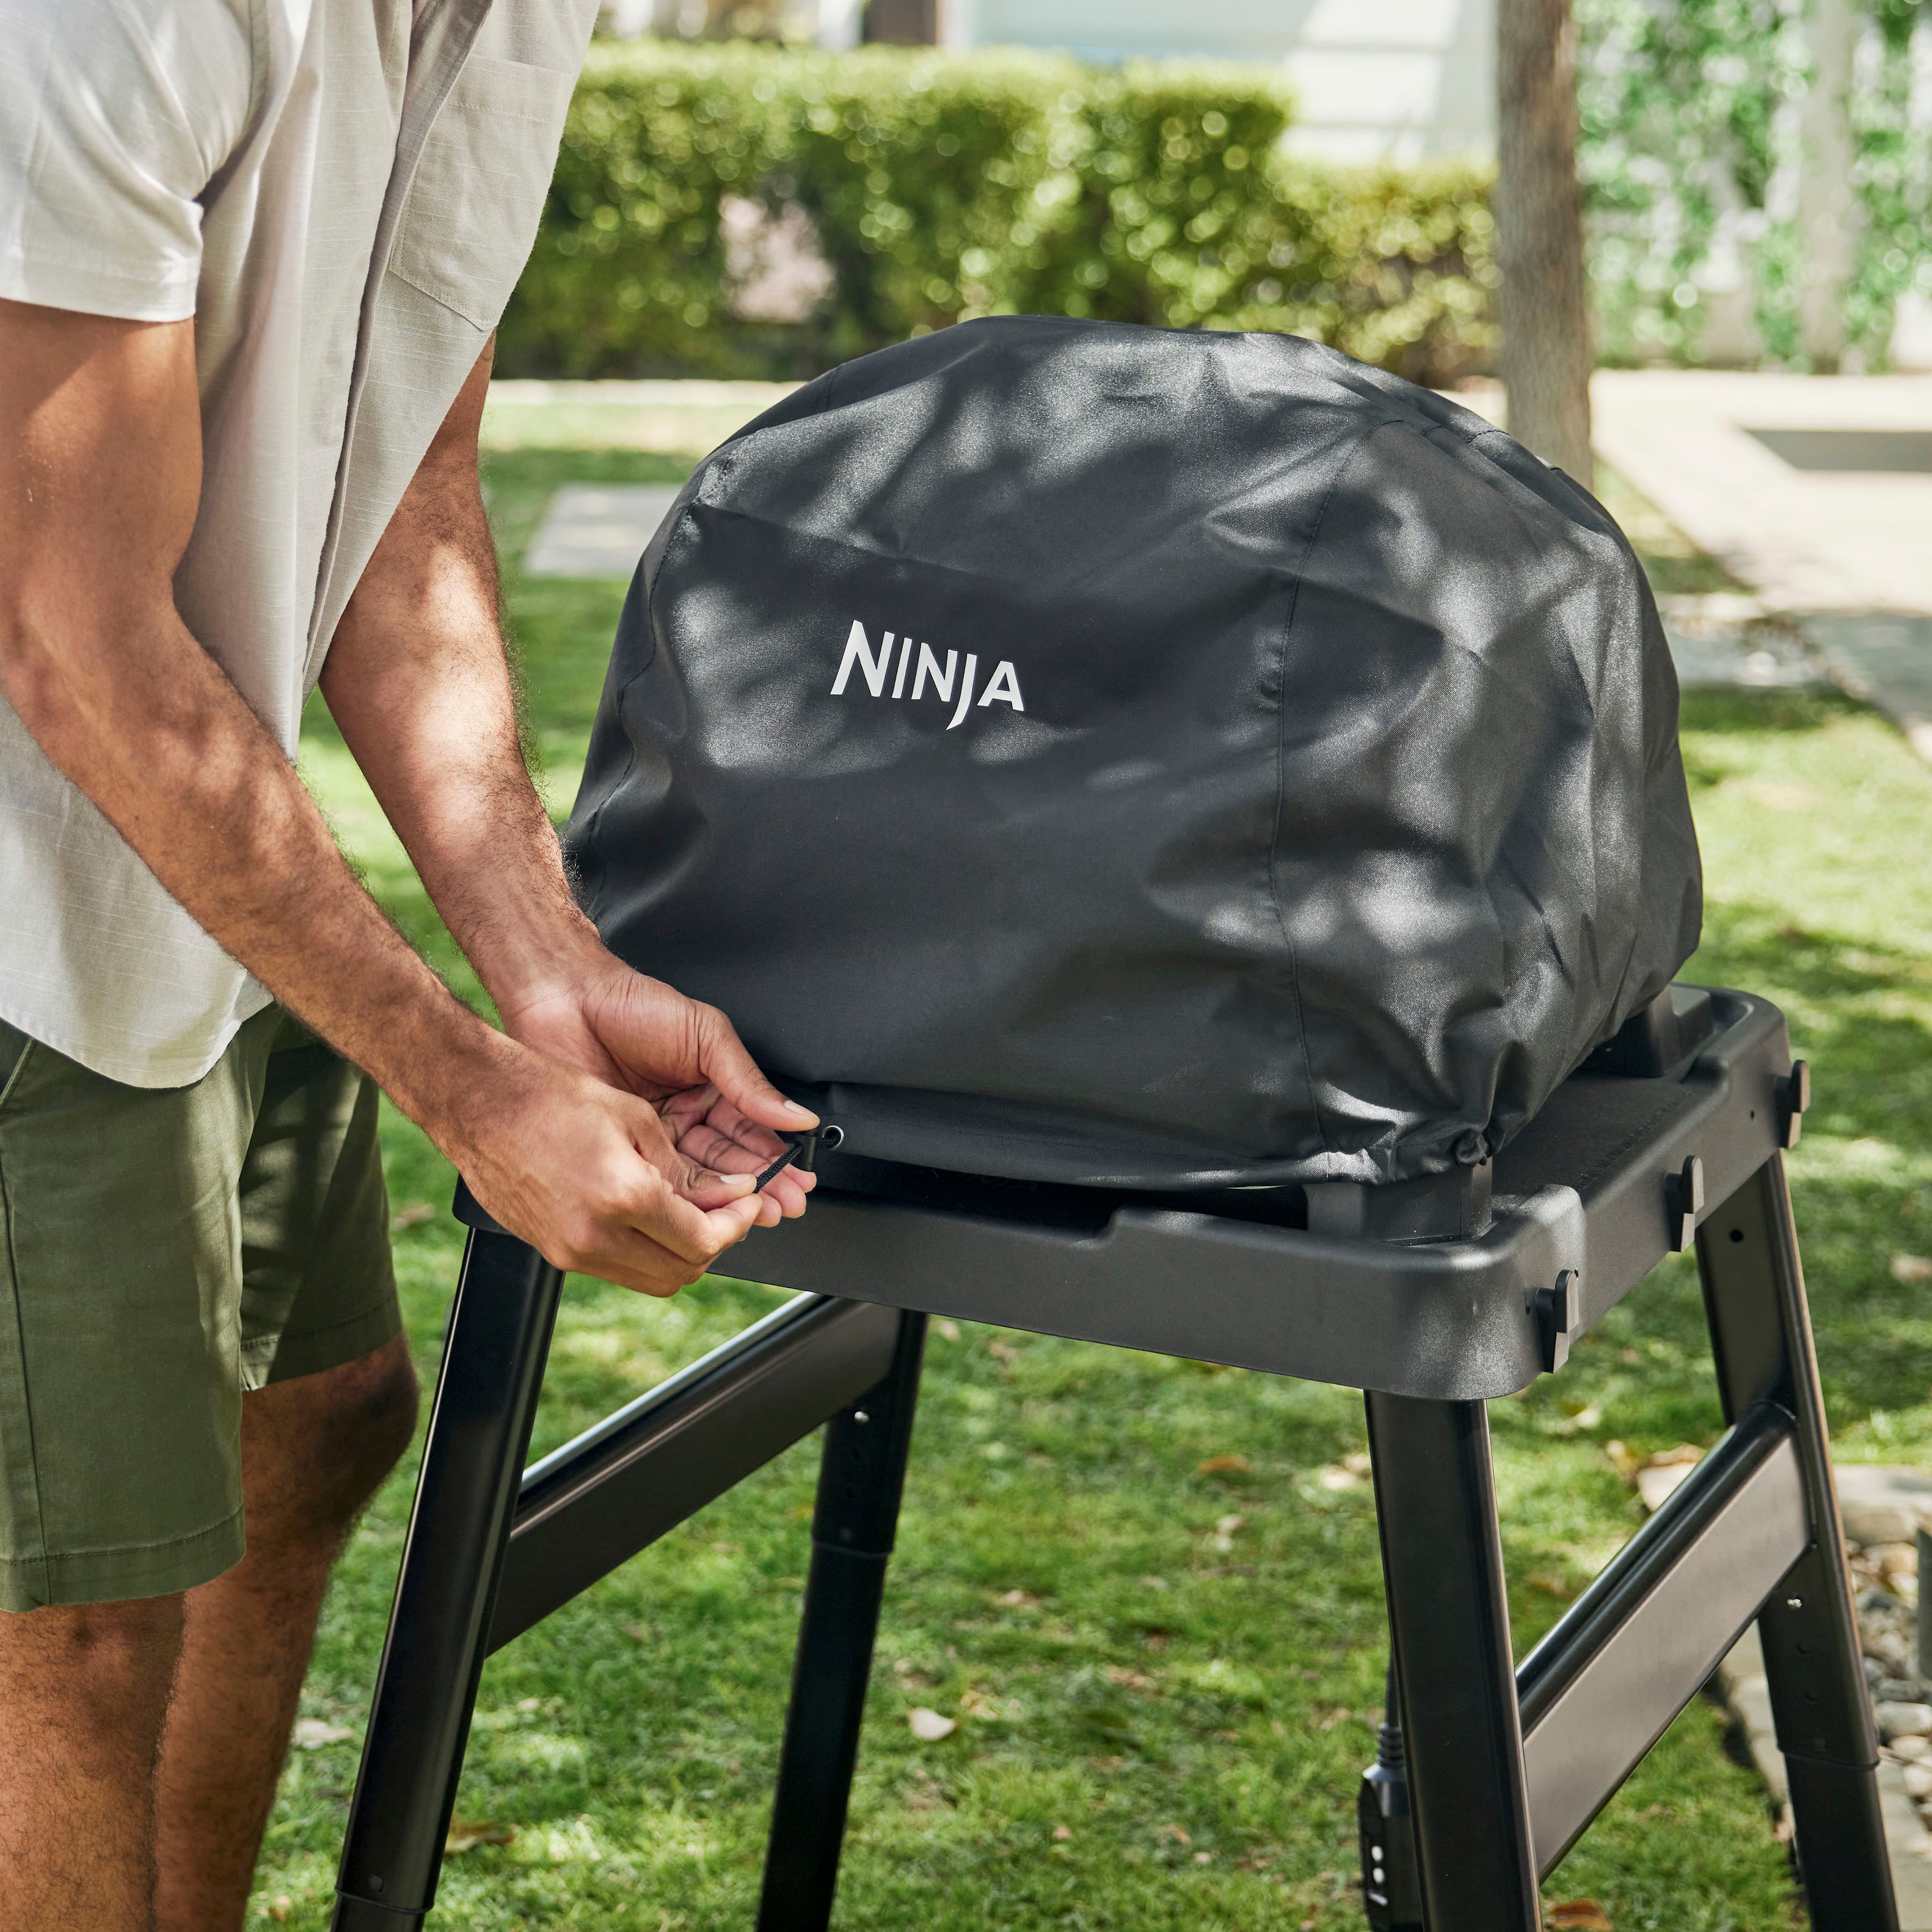 Ninja OG705A Woodfire All-in-One Outdoor Grill & Smoker with Grill Cover